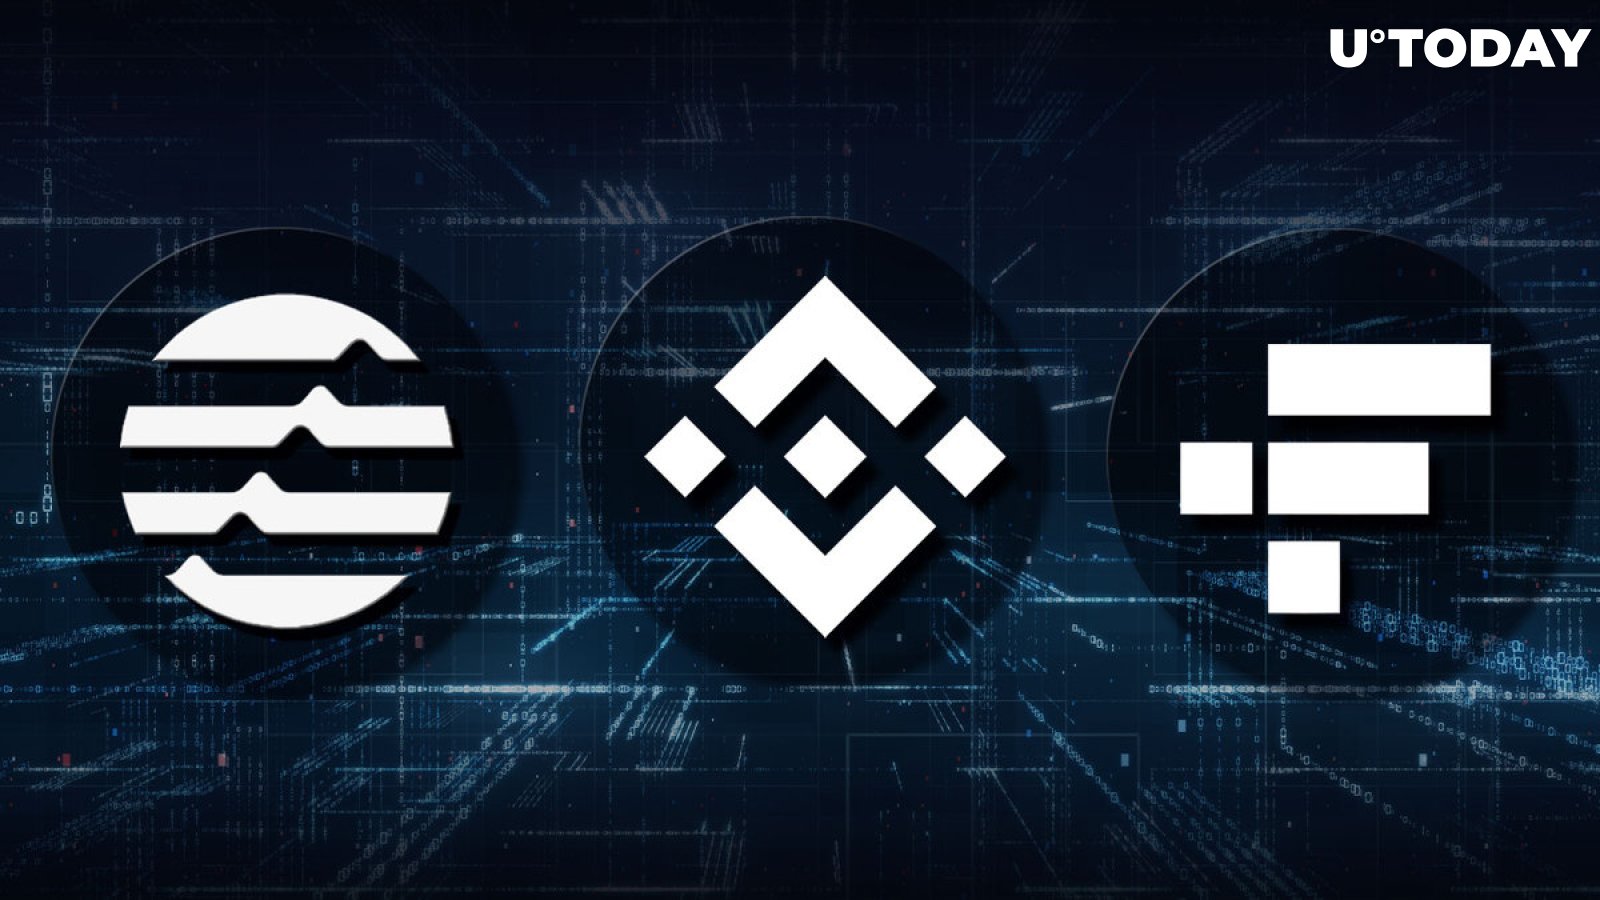 Aptos (APT) Hyped Tokenomics Finally Unveiled Ahead of Listing on Binance and FTX